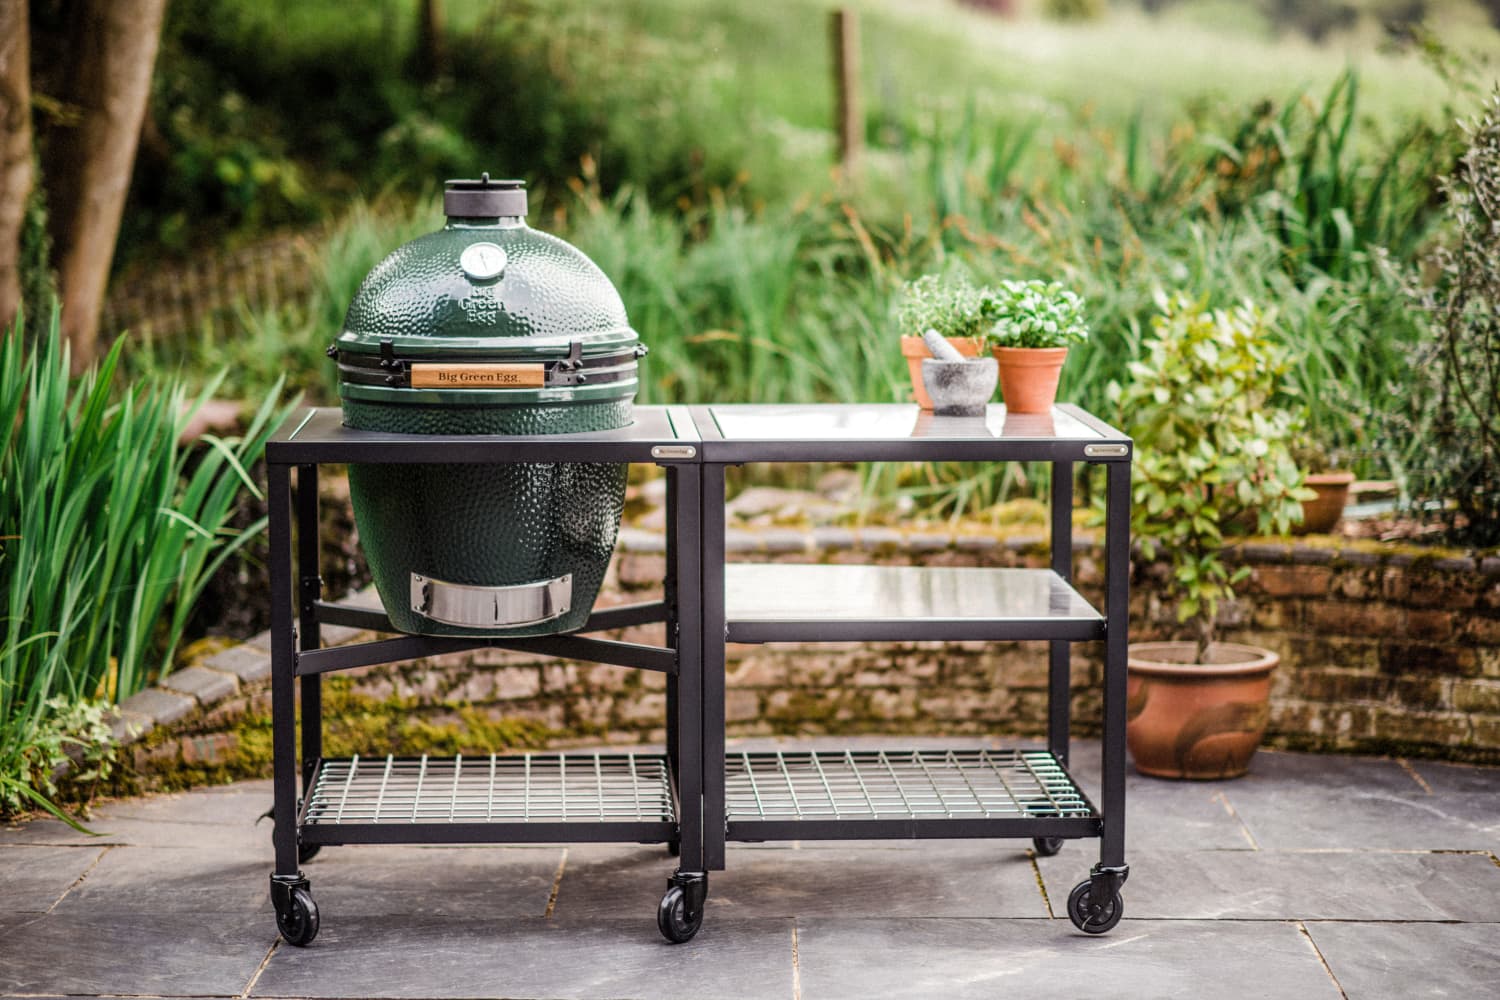 Lima omvatten Pellen What's a Big Green Egg - and Is It Worth the Money? | Kitchn